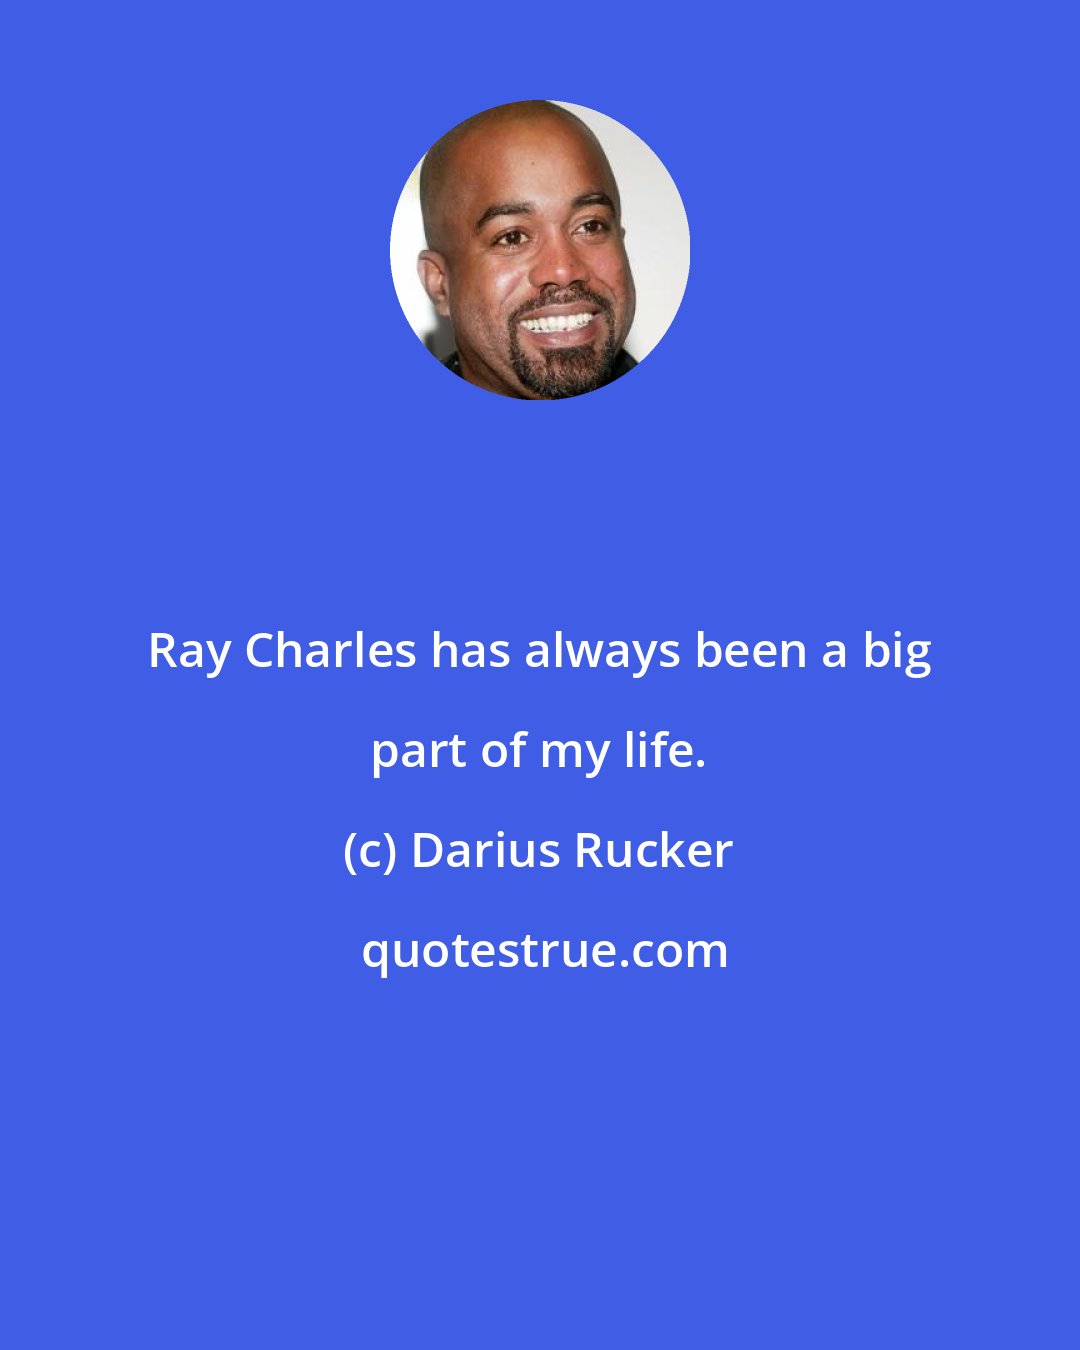 Darius Rucker: Ray Charles has always been a big part of my life.